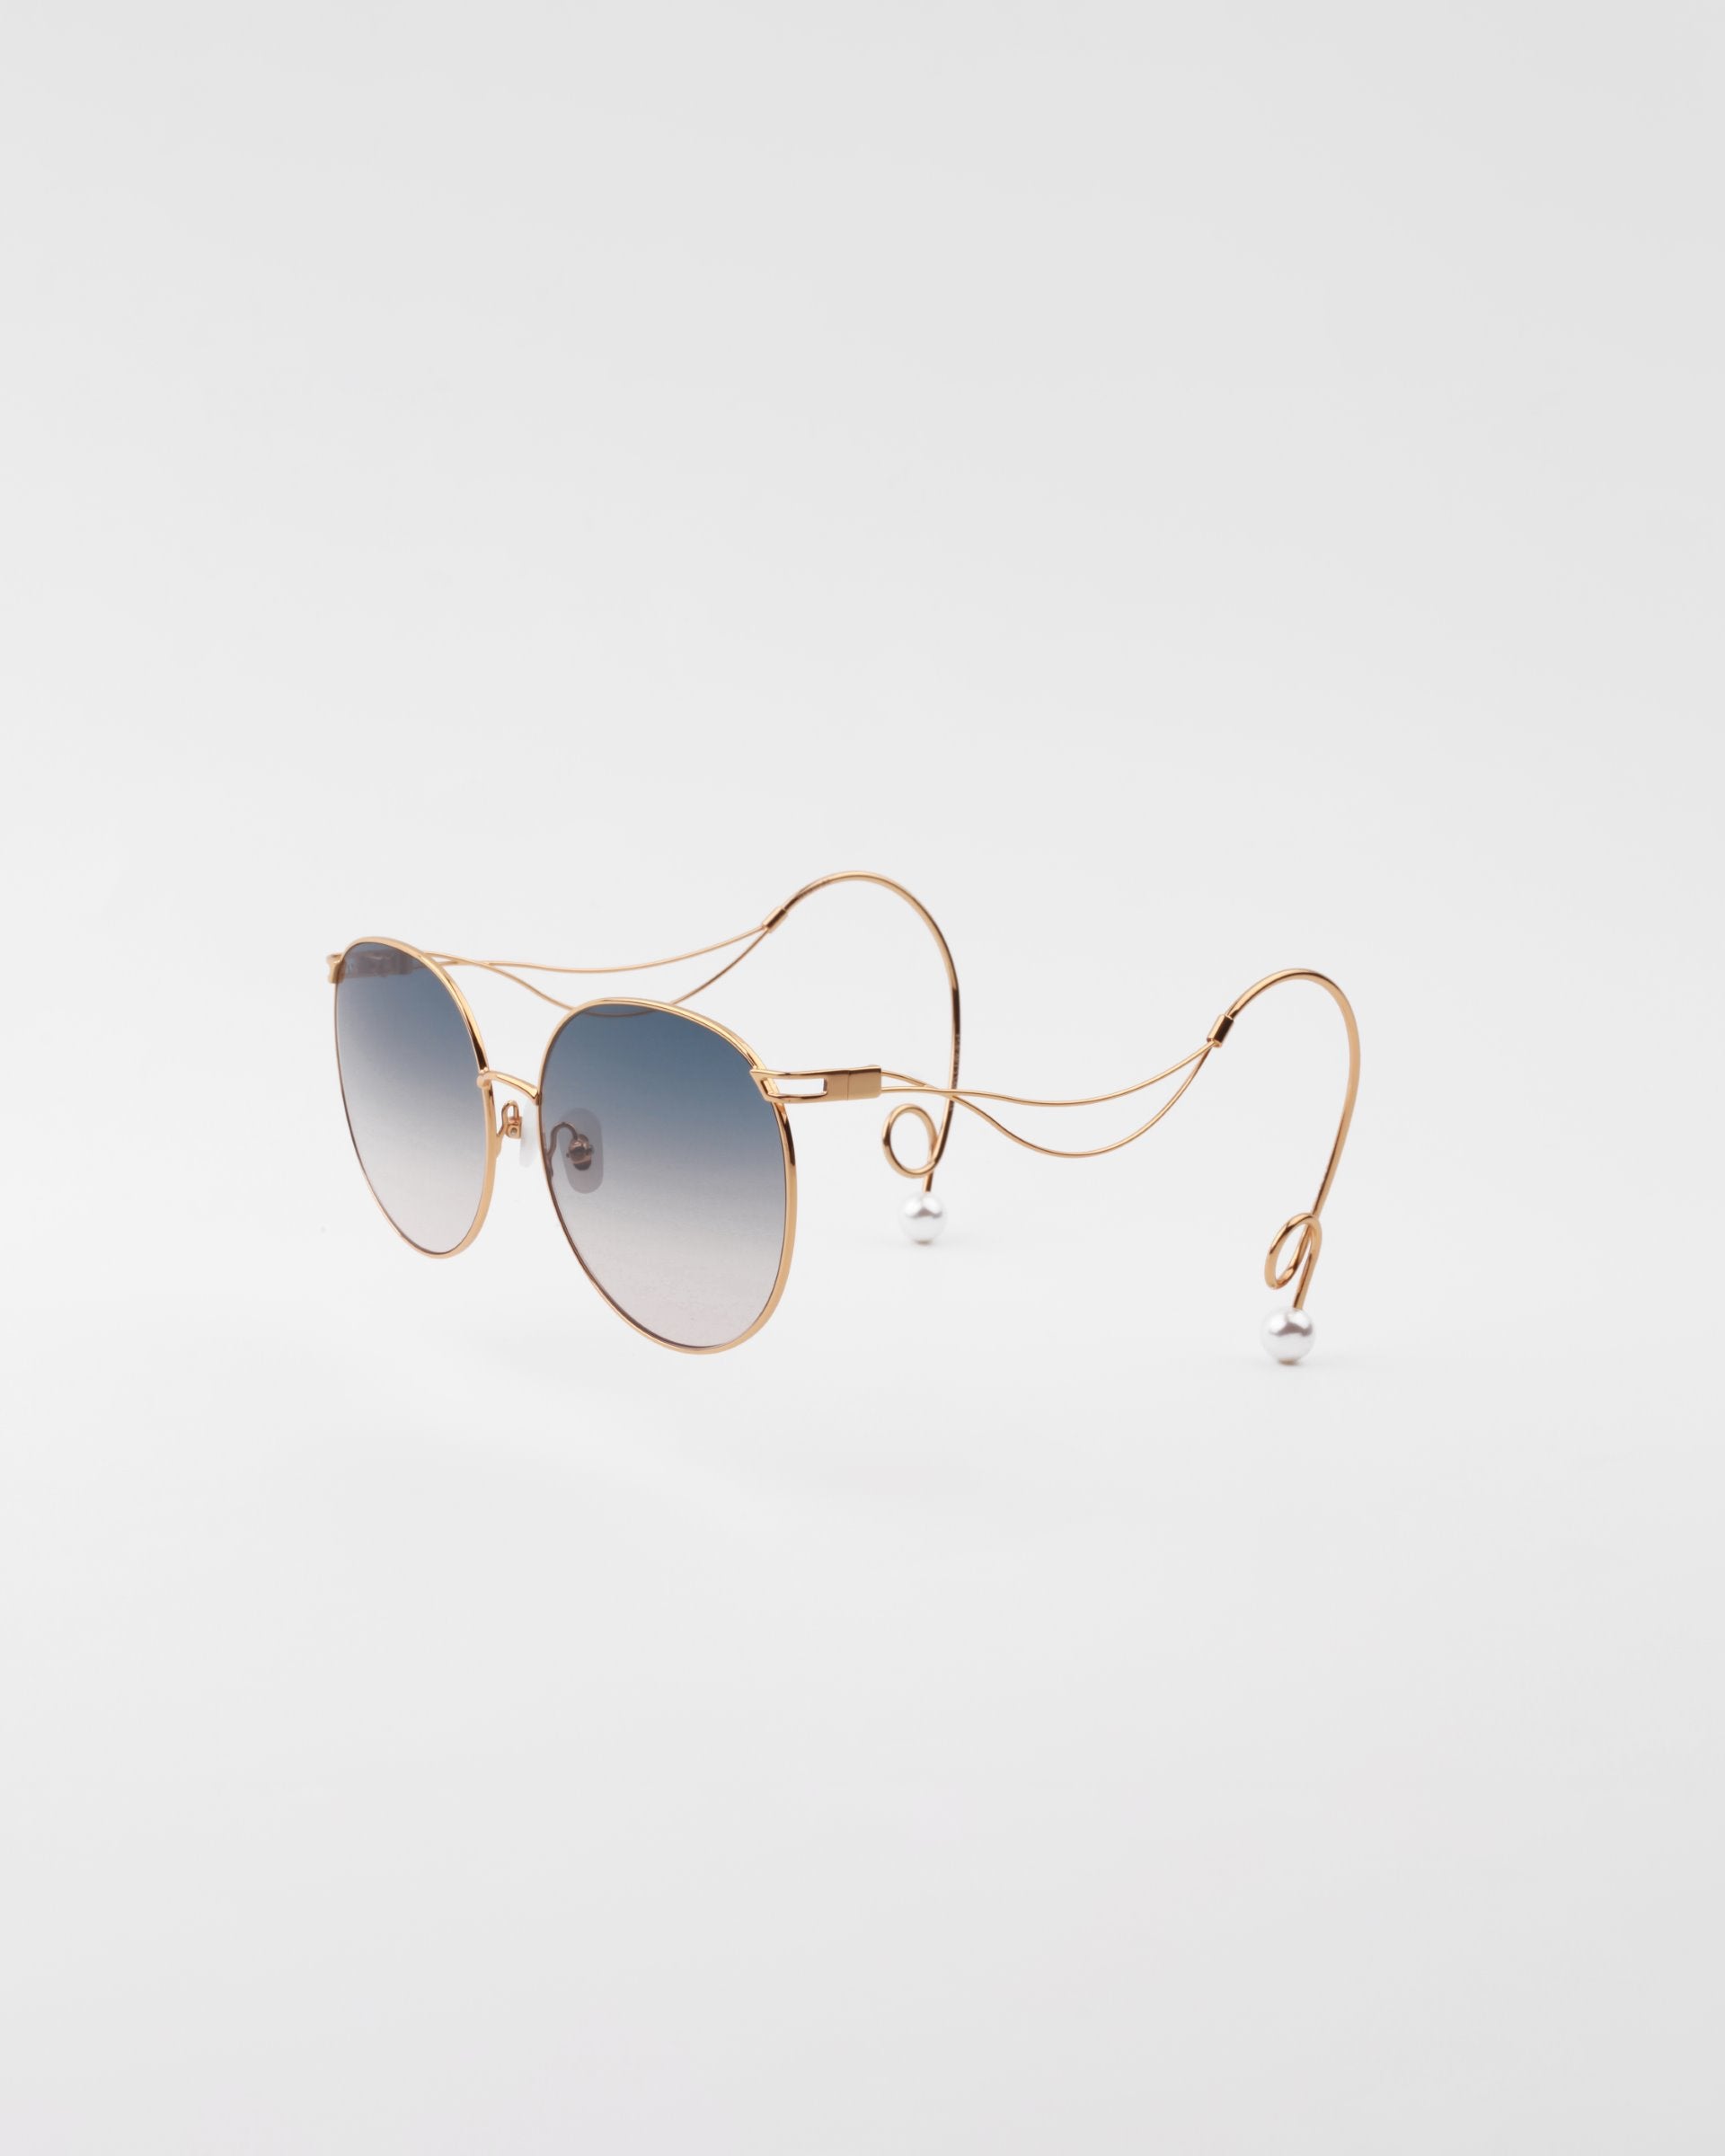 A pair of sunglasses featuring round, lightweight shatter-resistant lenses with a gradient from dark to light shades. The handmade gold-plated frame has thin, intricate wire temples that curve and loop at the ends, with hypoallergenic nose pads adding comfort to this unique and stylish Birthday Cake design by For Art&#39;s Sake® against a plain white background.